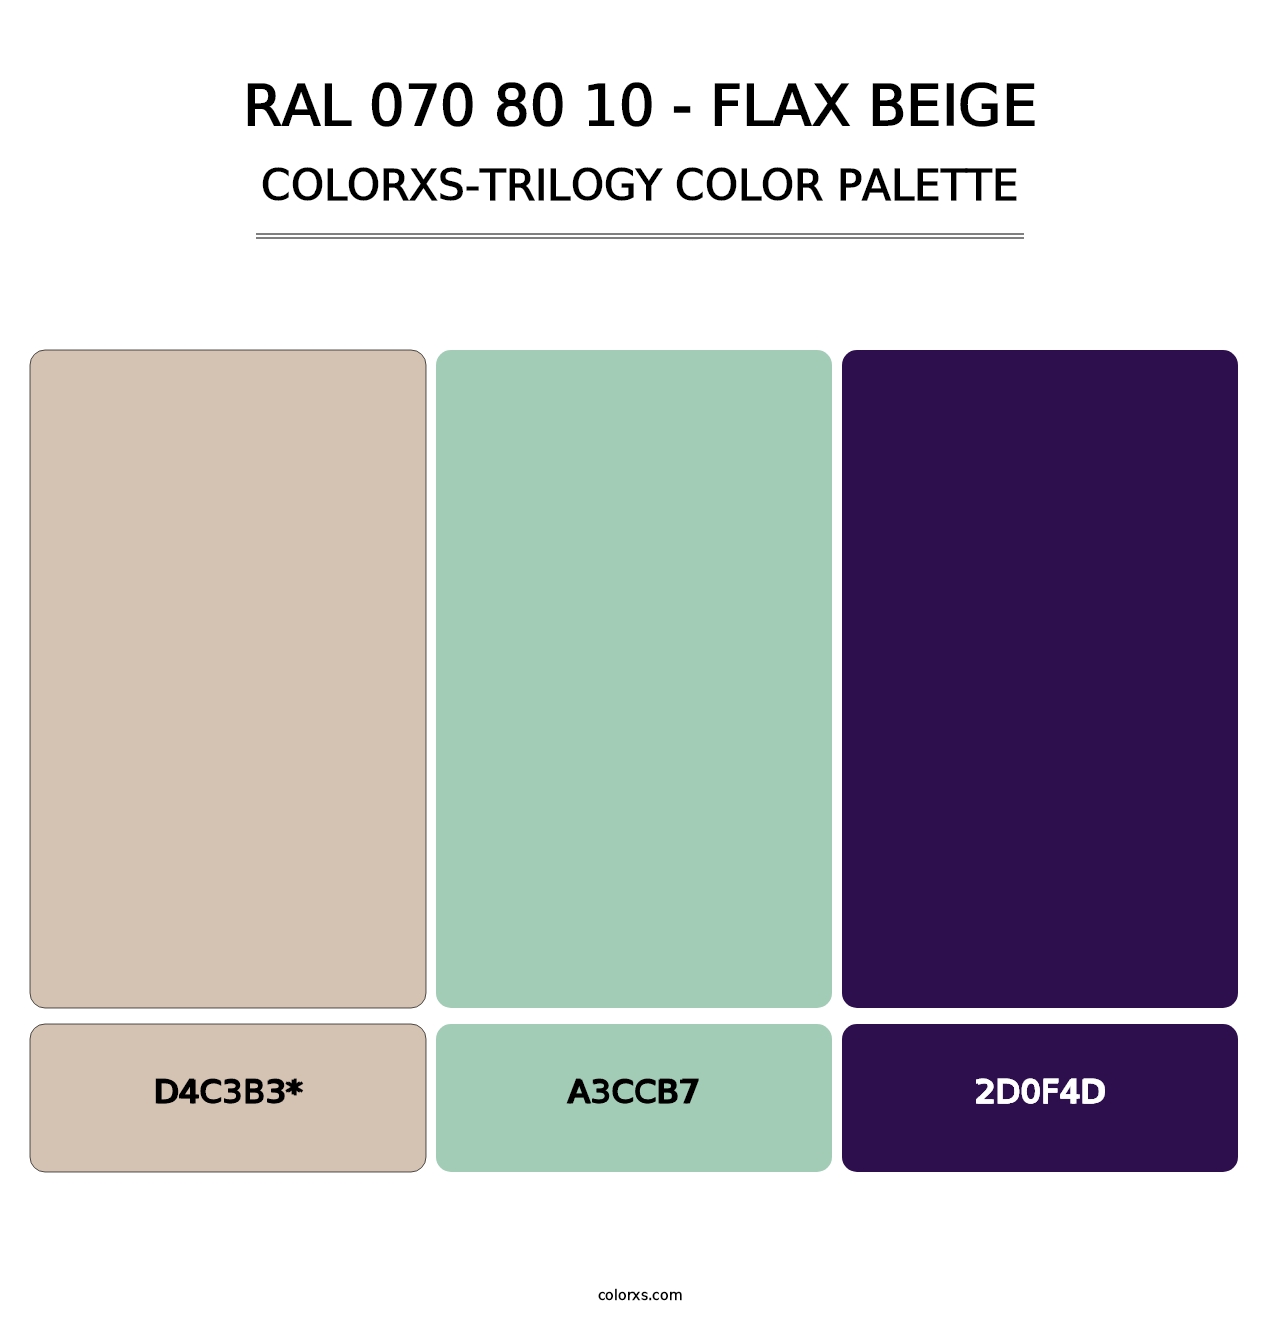 RAL 070 80 10 - Flax Beige - Colorxs Trilogy Palette